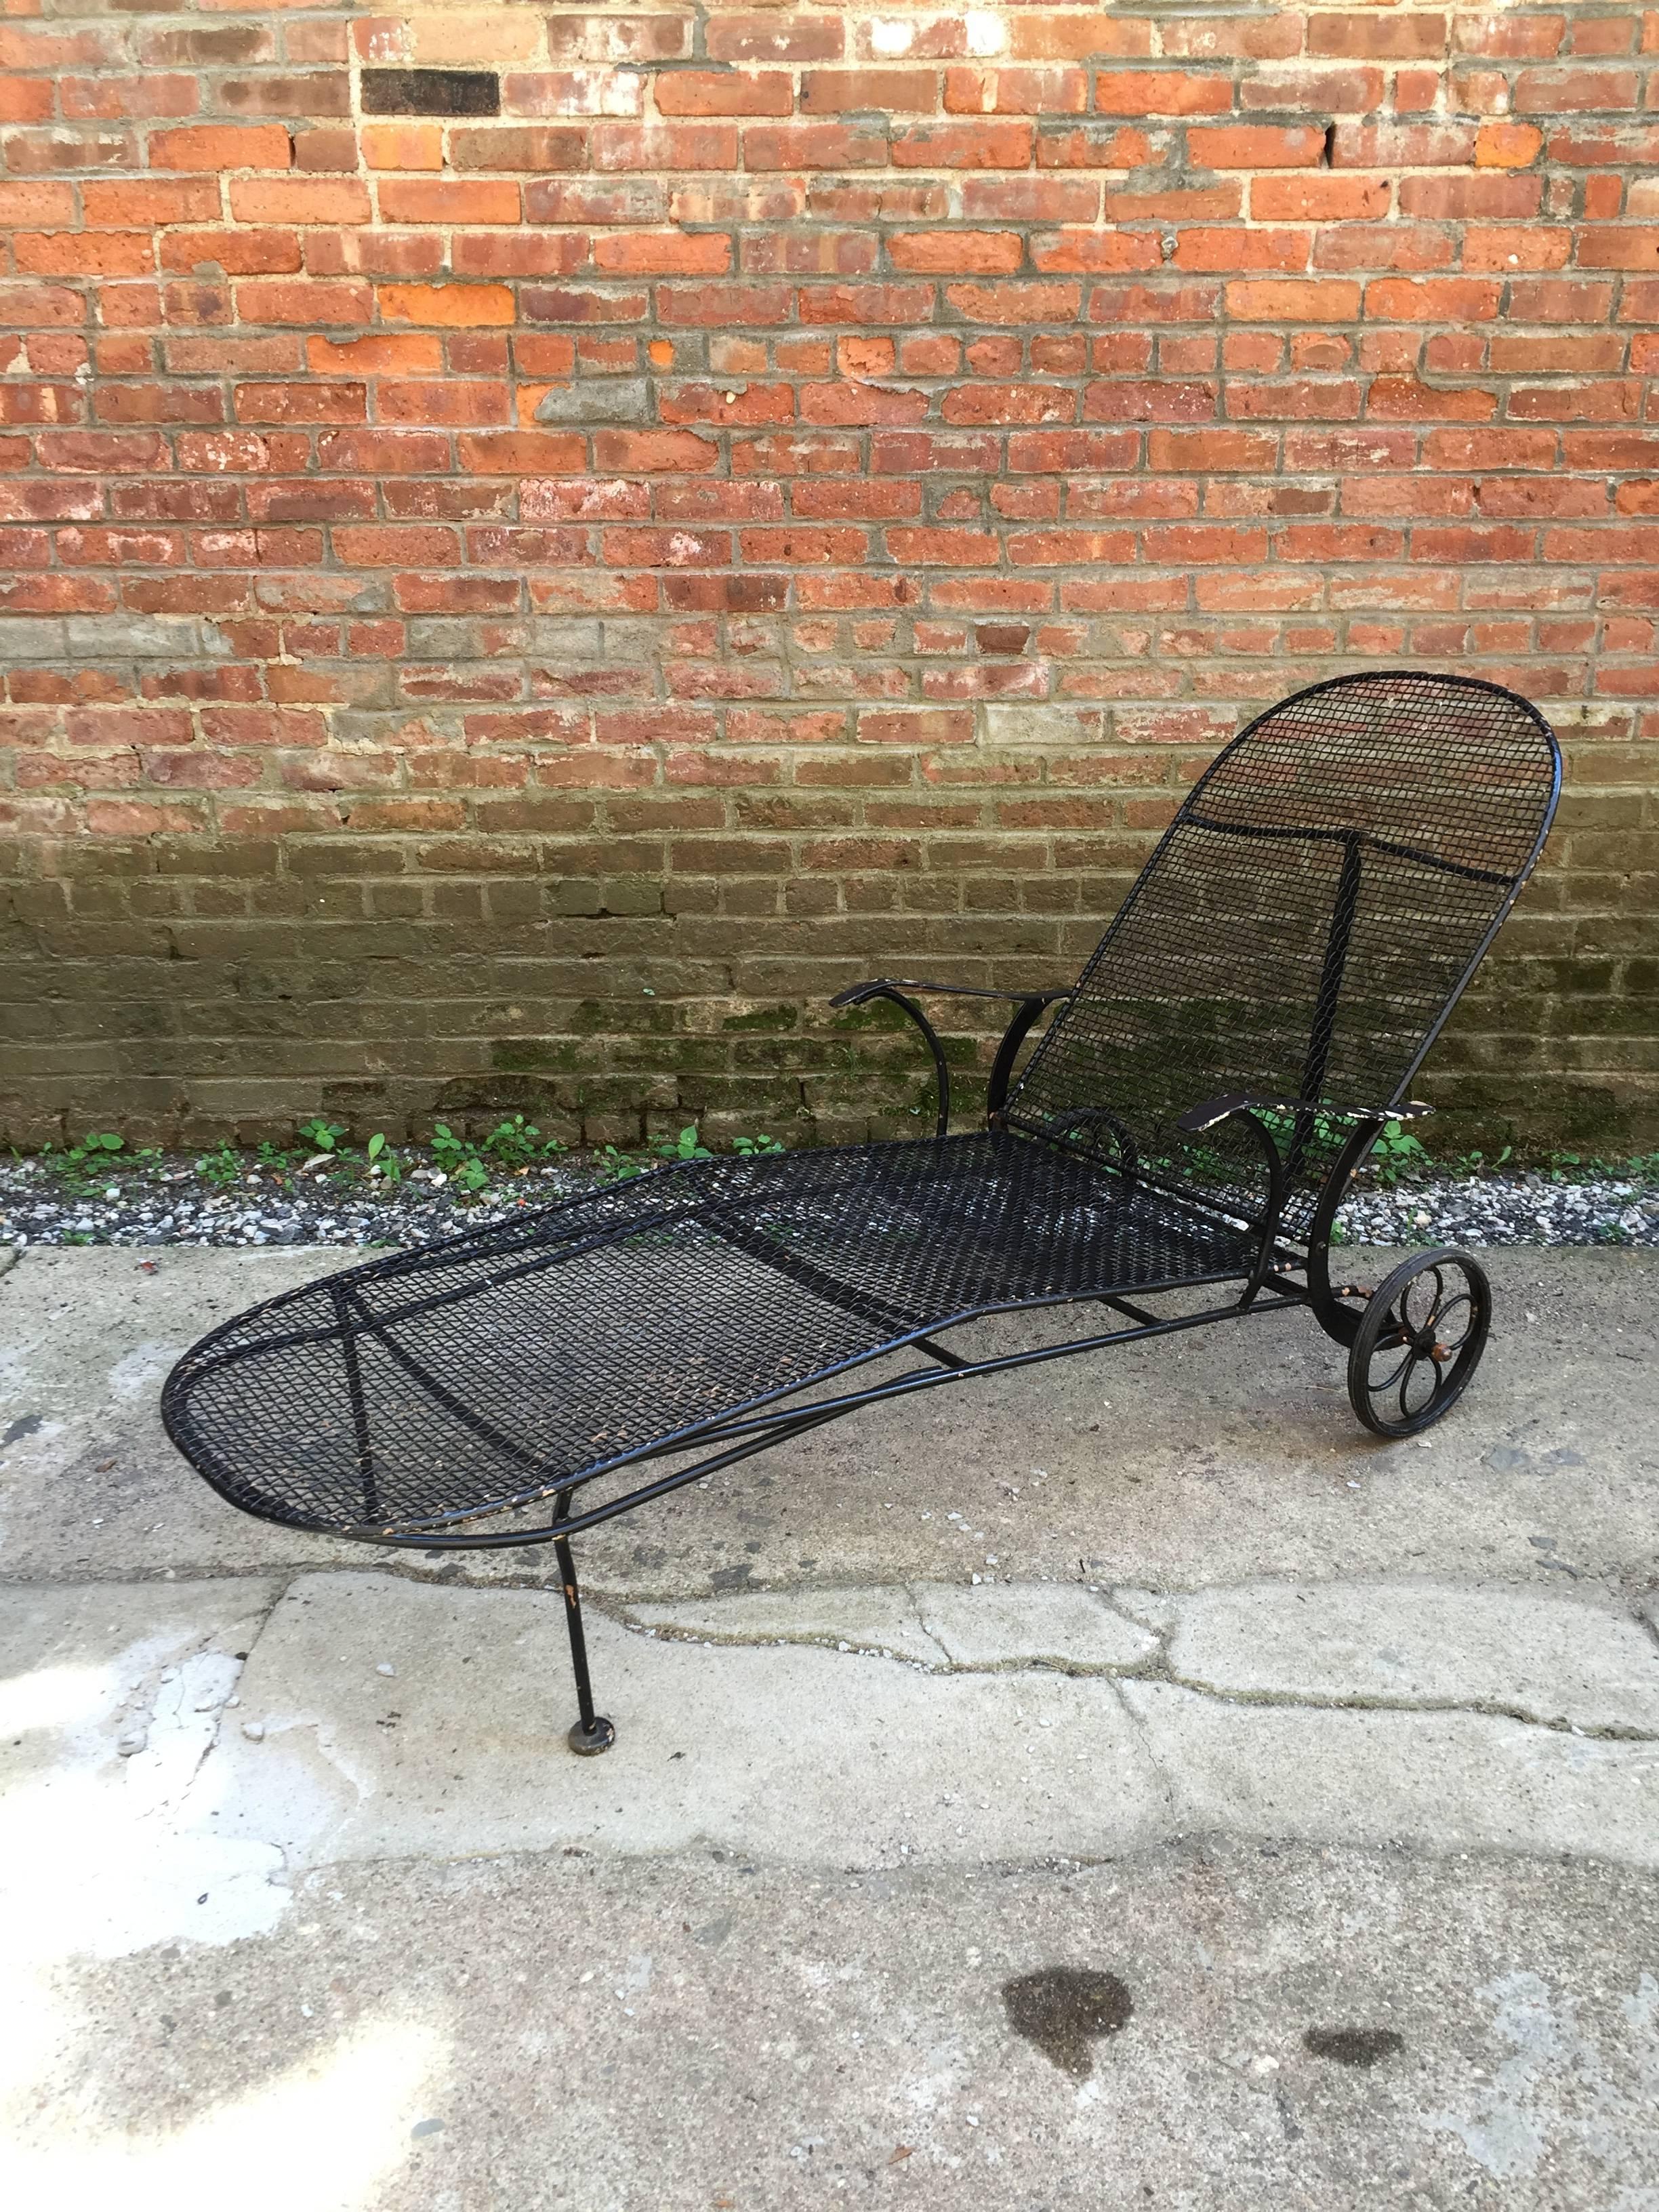 Fully adjustable and mobile wire mesh Woodard chaise longue. Patio or poolside perfection.